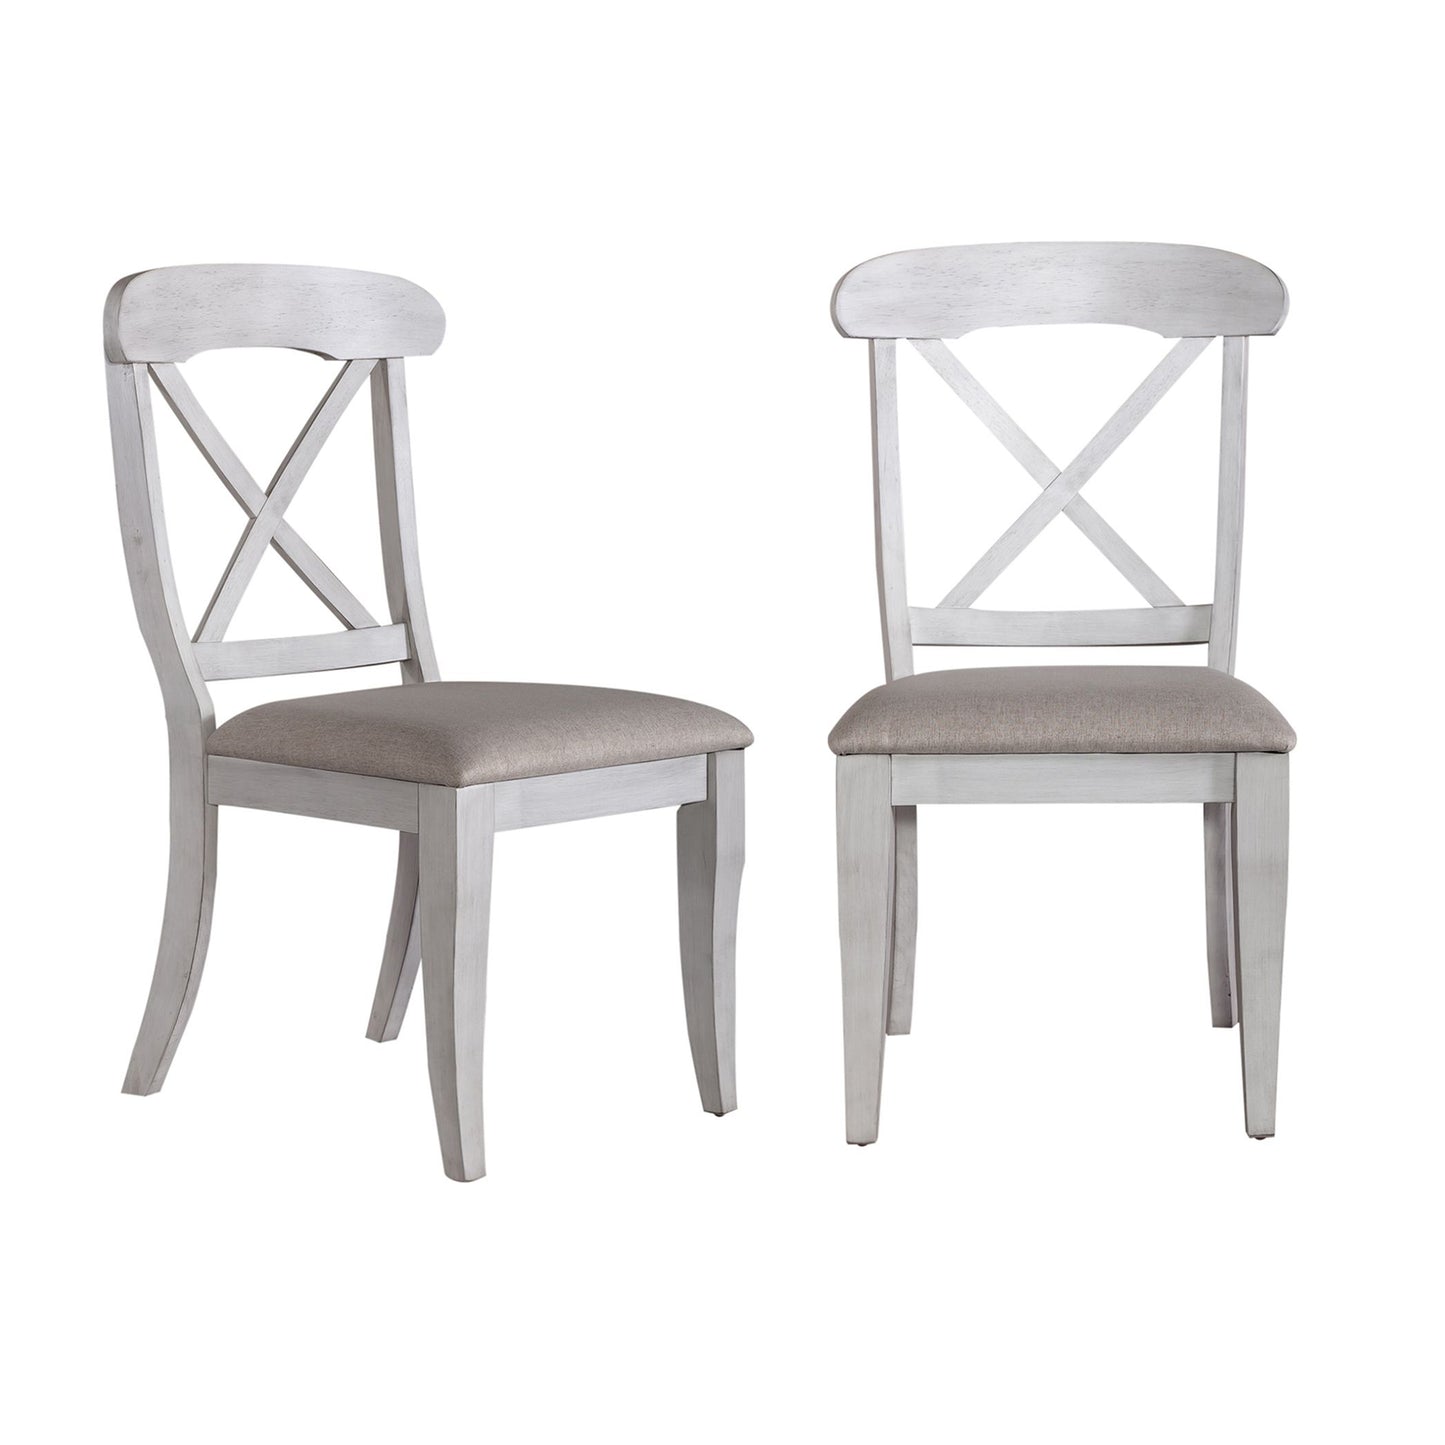 Chandria Antique White Solid Wood X-Back Upholstered Dining Chairs, Set of 2